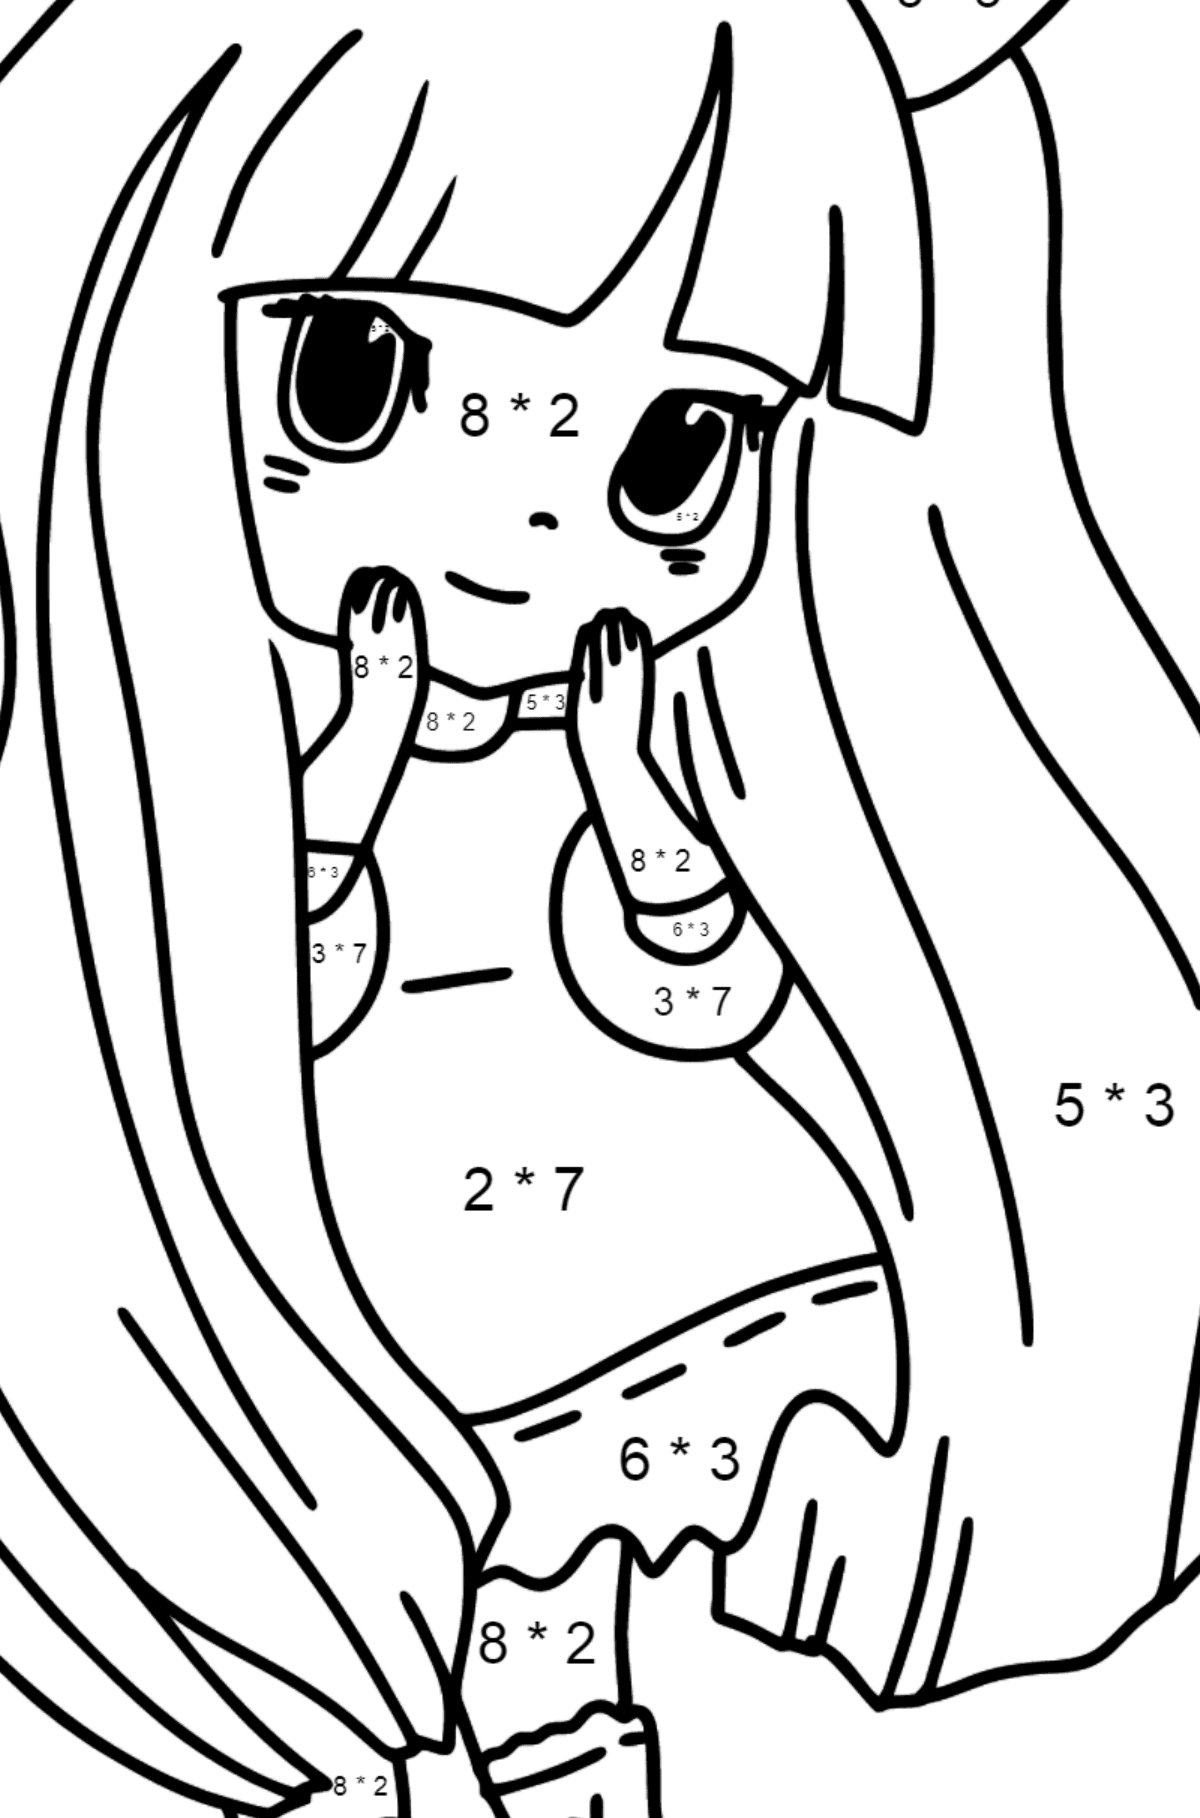 Anime Bunny Girl Coloring Pages - Math Coloring - Multiplication for Kids